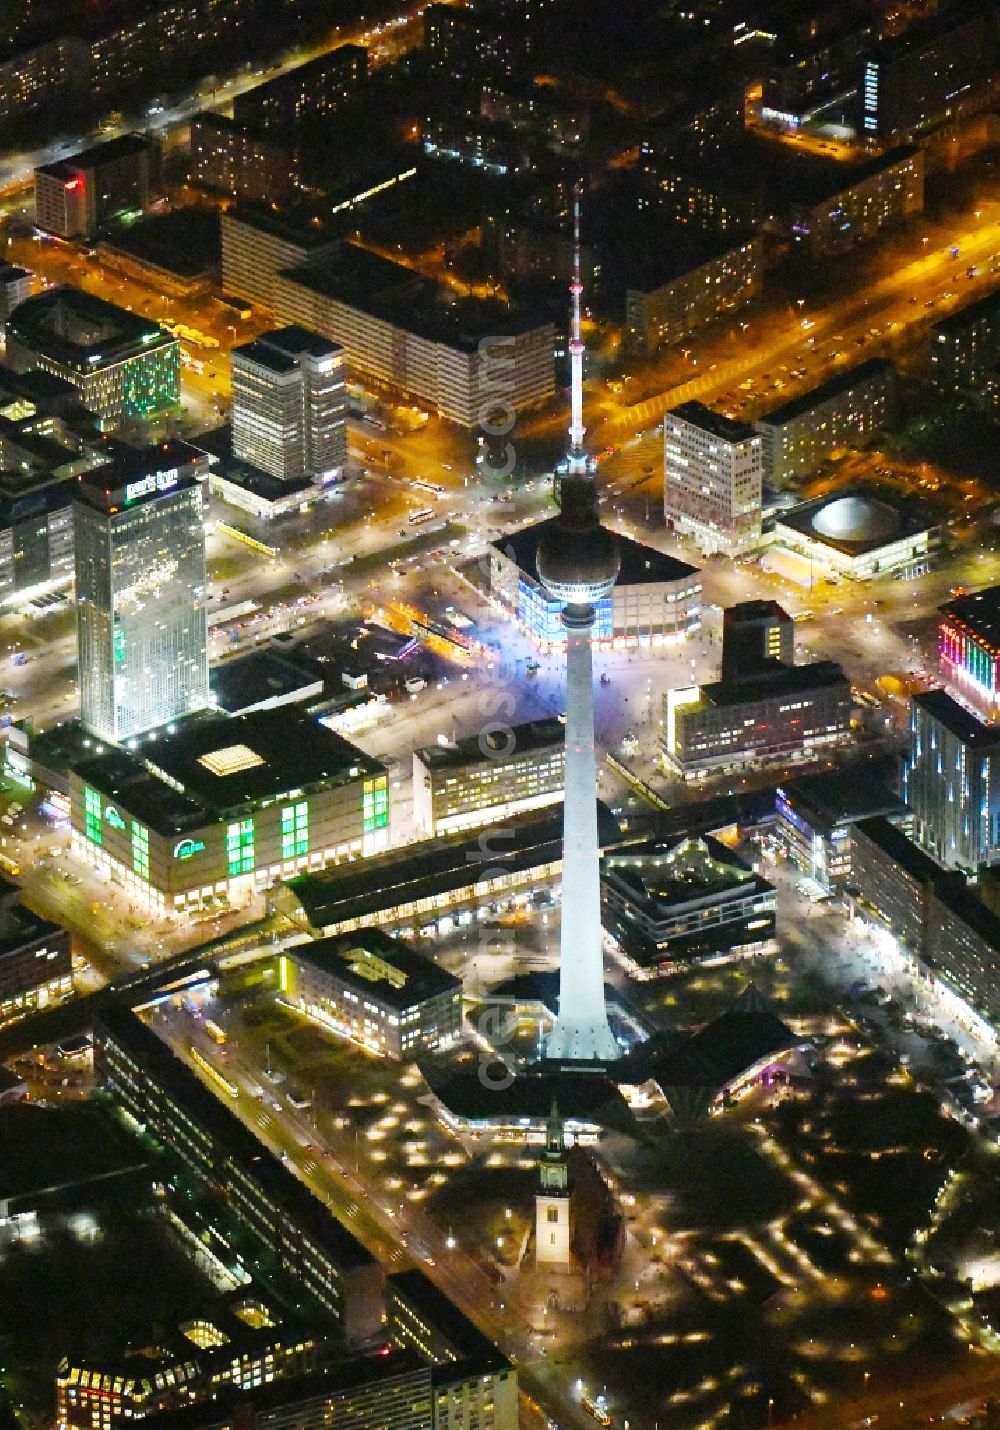 Berlin at night from the bird perspective: Night lighting The city center in the downtown area on tv- tower - Alexanderplatz in the district Mitte in Berlin, Germany